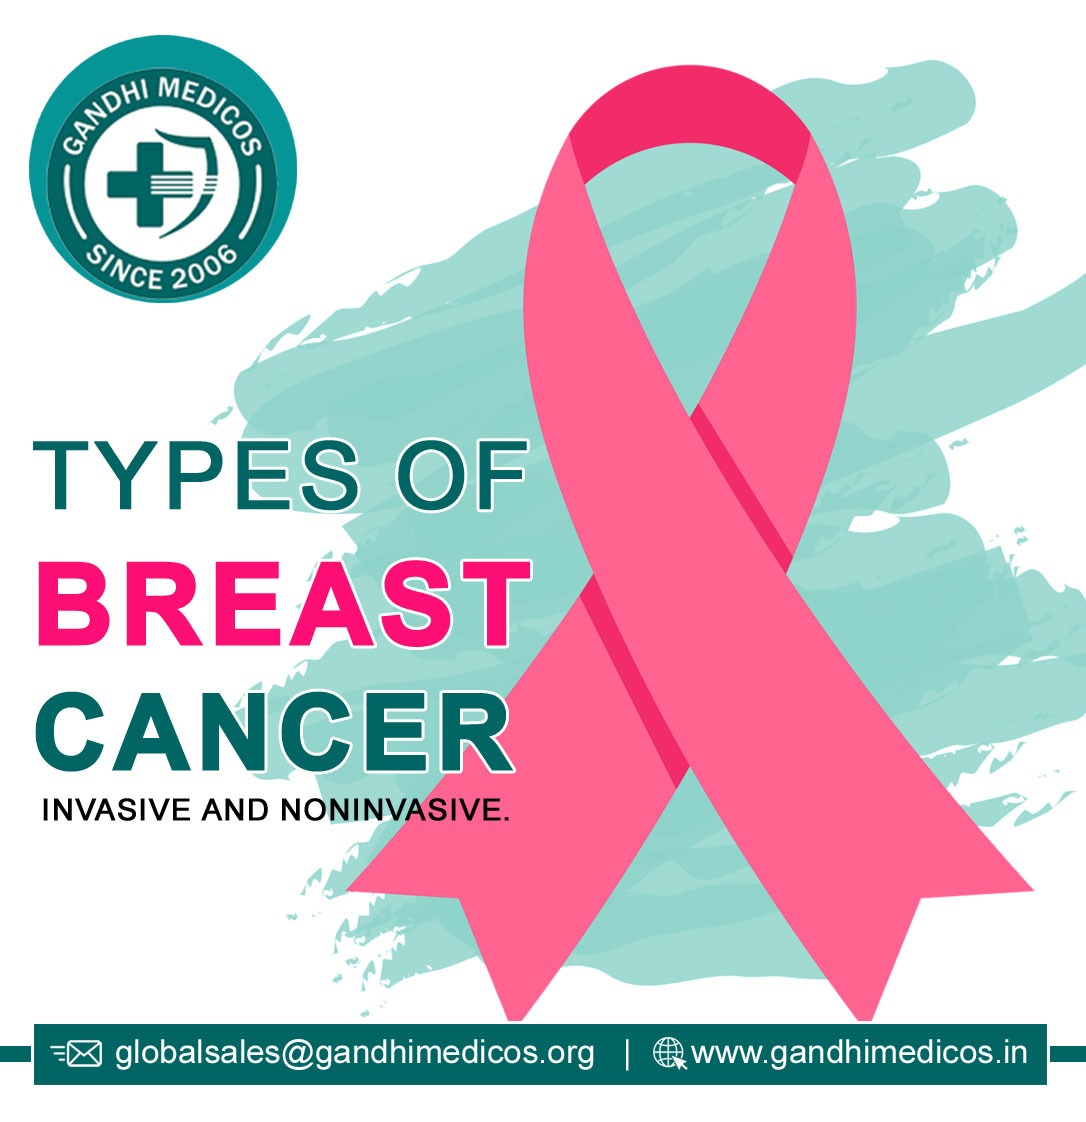 Types of Breast Cancer 